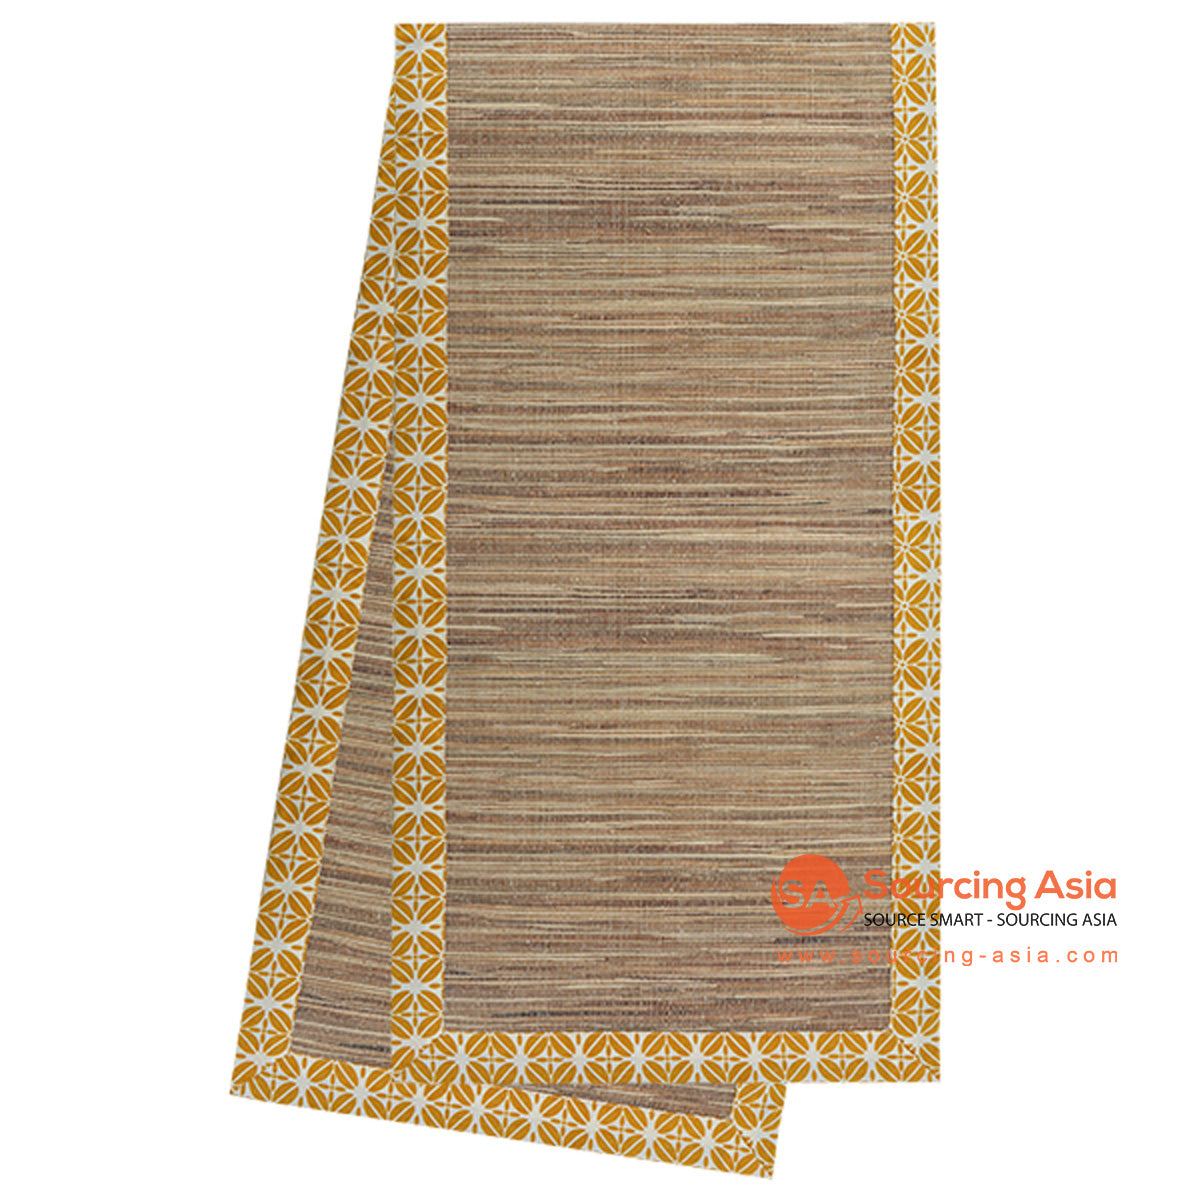 BZN032-3 WATER HYACINTH AND PRINTED COTTON TABLE RUNNER